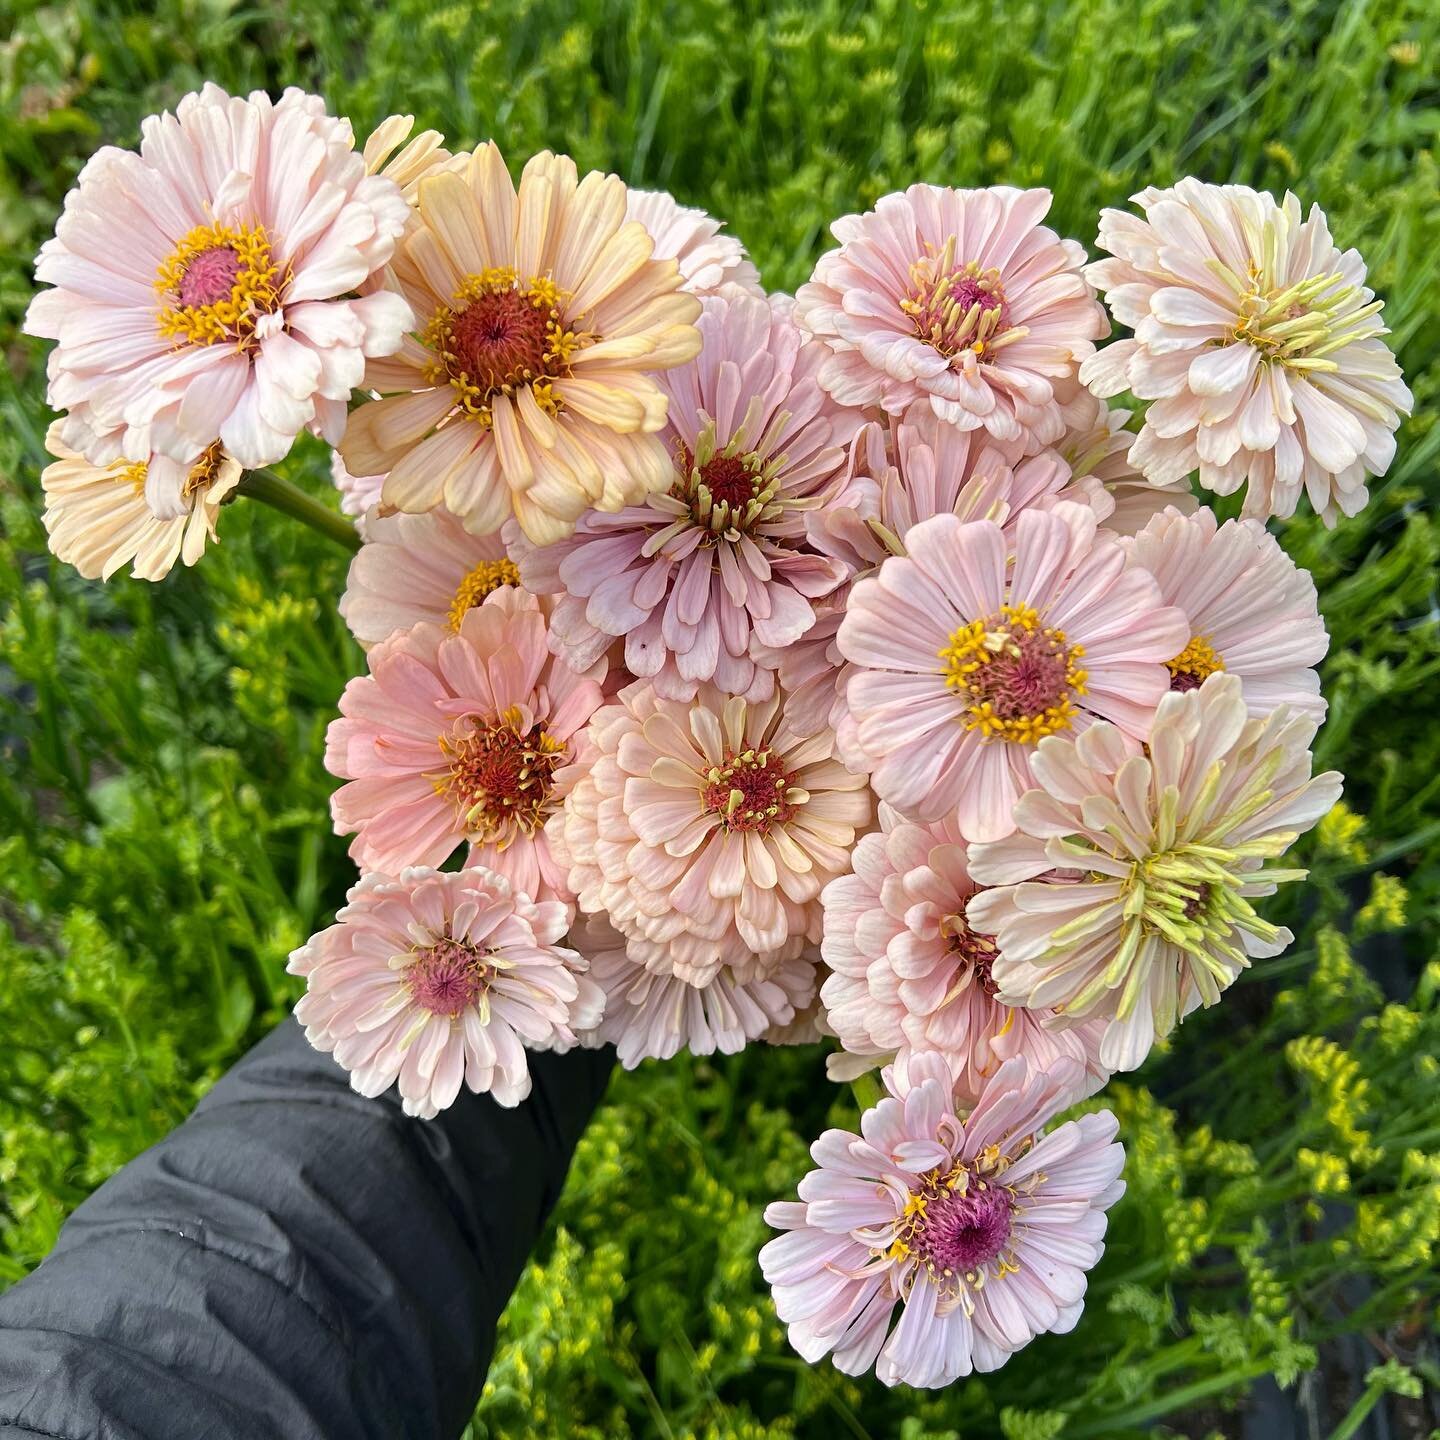 Zinnias 🌸! Every year we have a little patch of these @dawncreekfarm seeds and this is the year that we are going to collect our own seed for the future. I love all the light blush and peach tones 🍑. Jules @spacetwinsprovisions and I are still blow